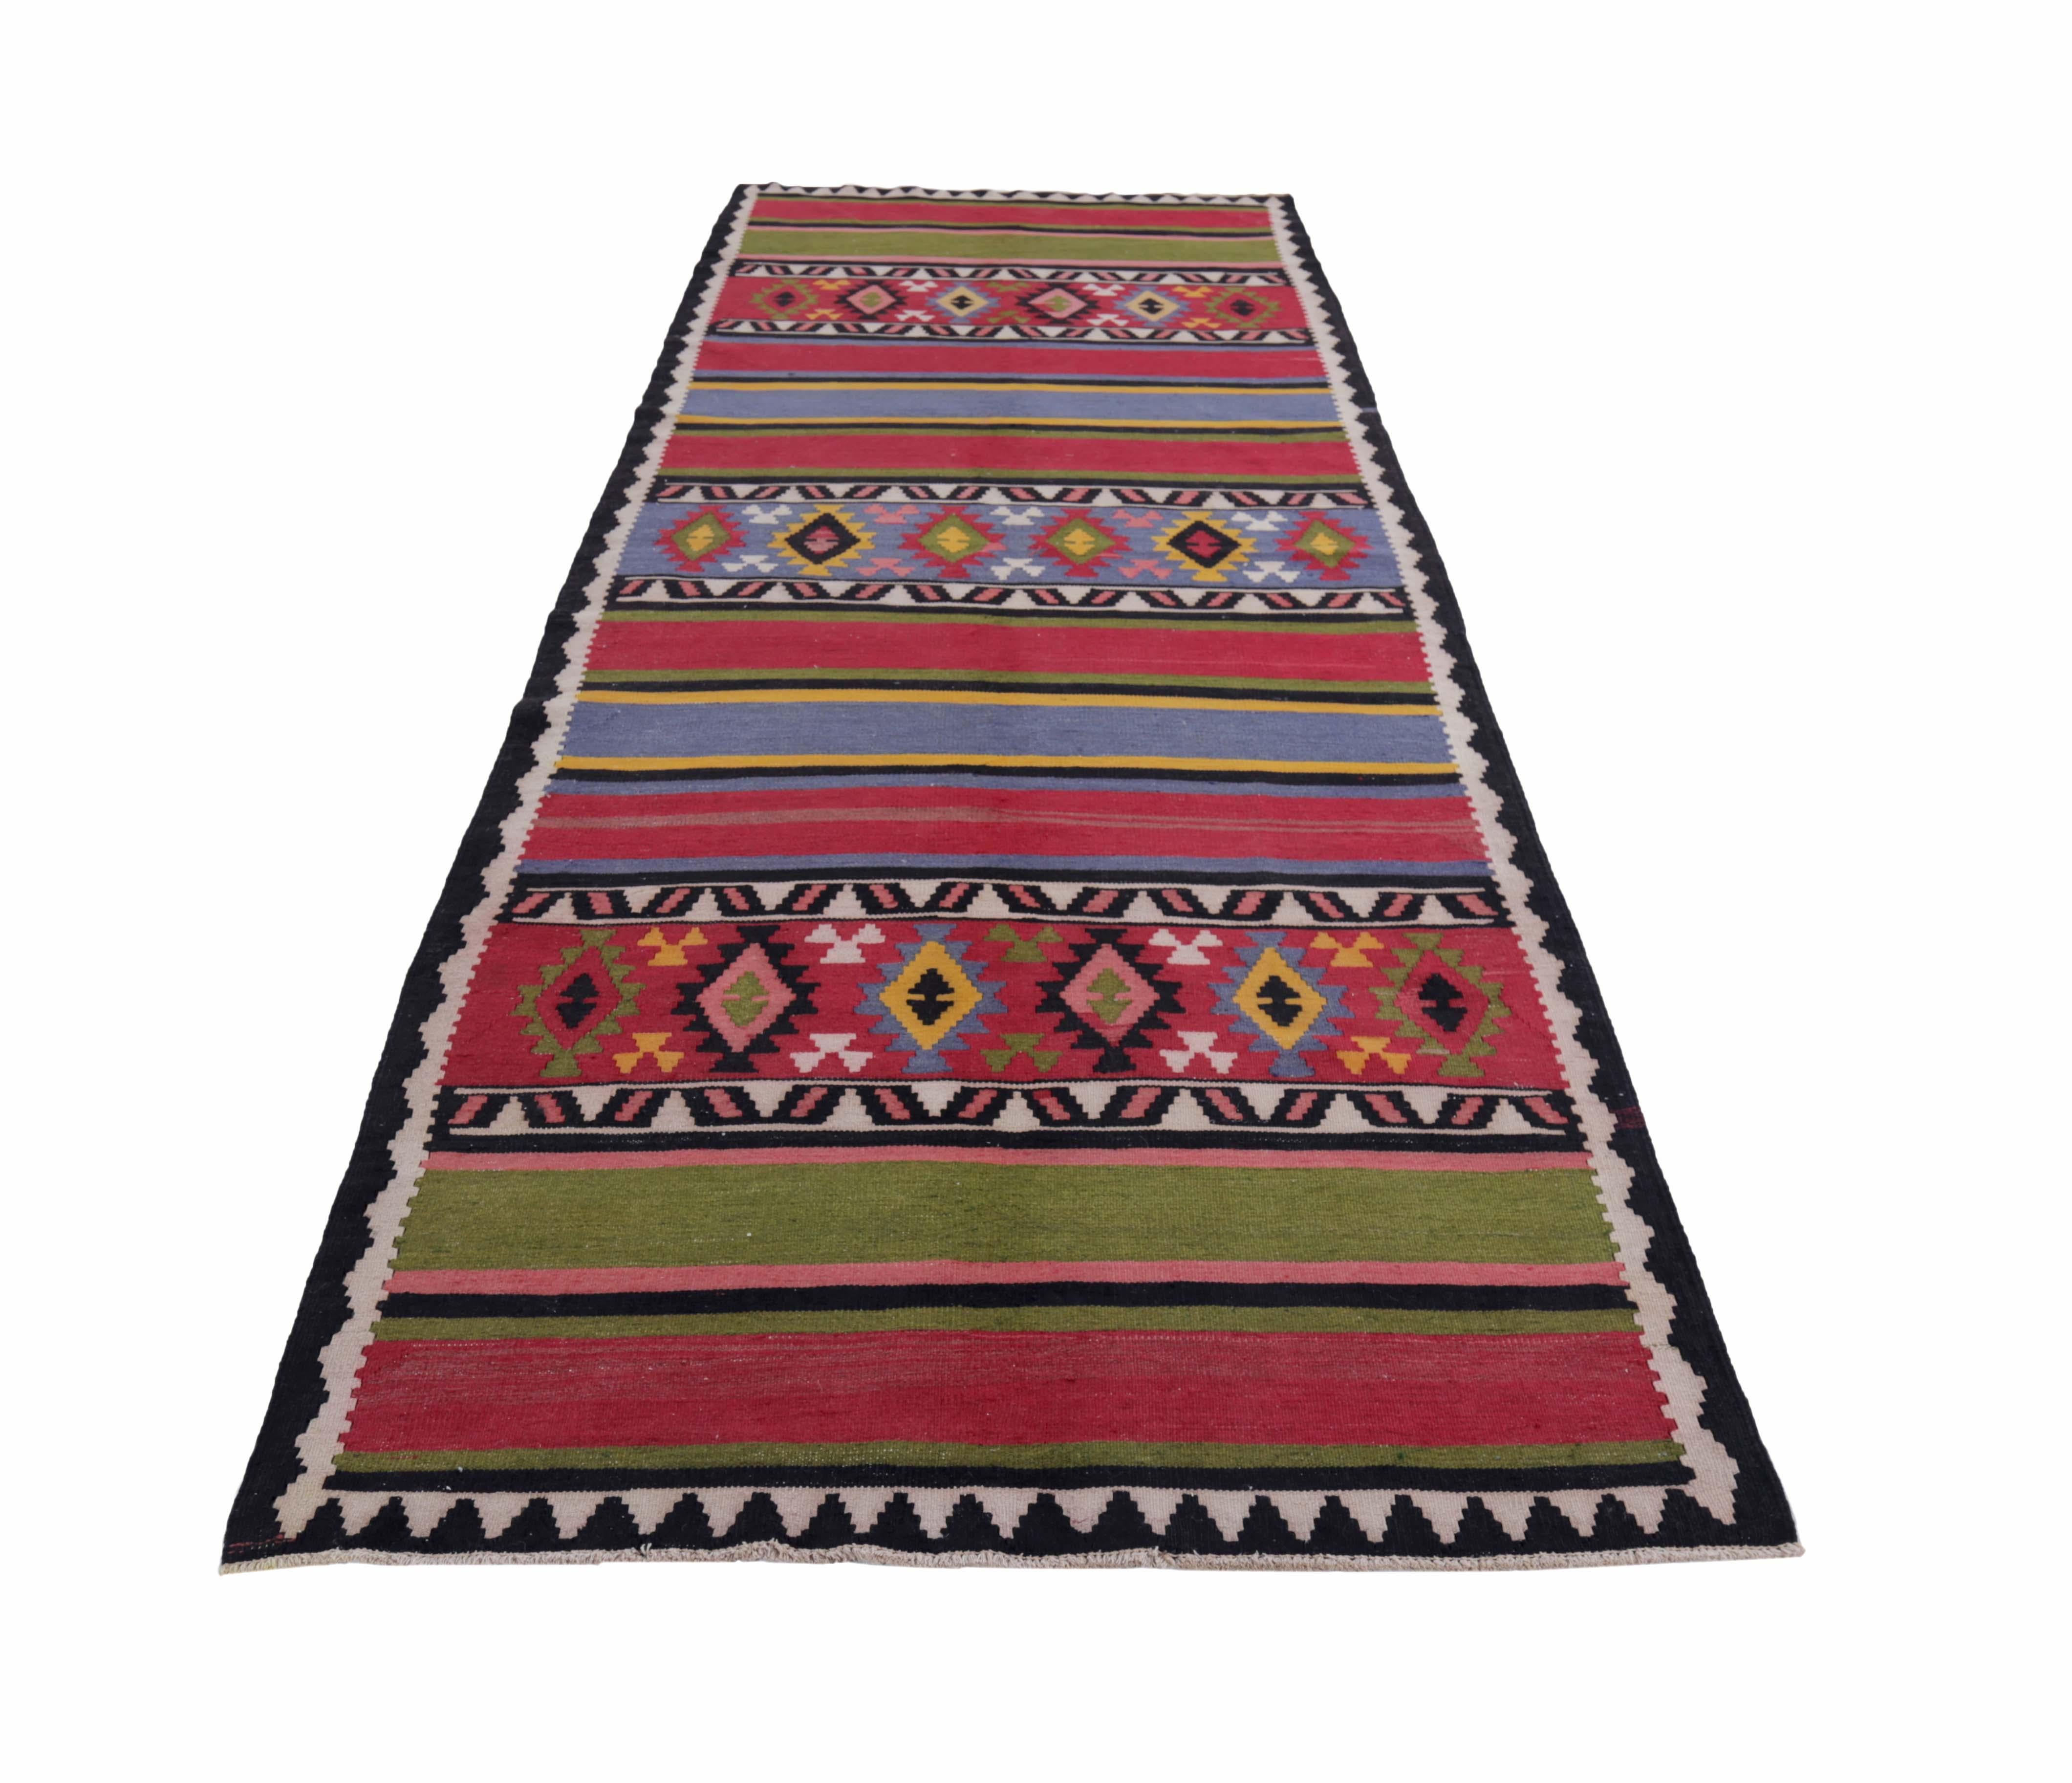 Turkish rug handwoven from the finest sheep’s wool and colored with all-natural vegetable dyes that are safe for humans and pets. It’s a traditional Kilim flat-weave design featuring red, green and blue stripes with tribal designs. It’s a stunning